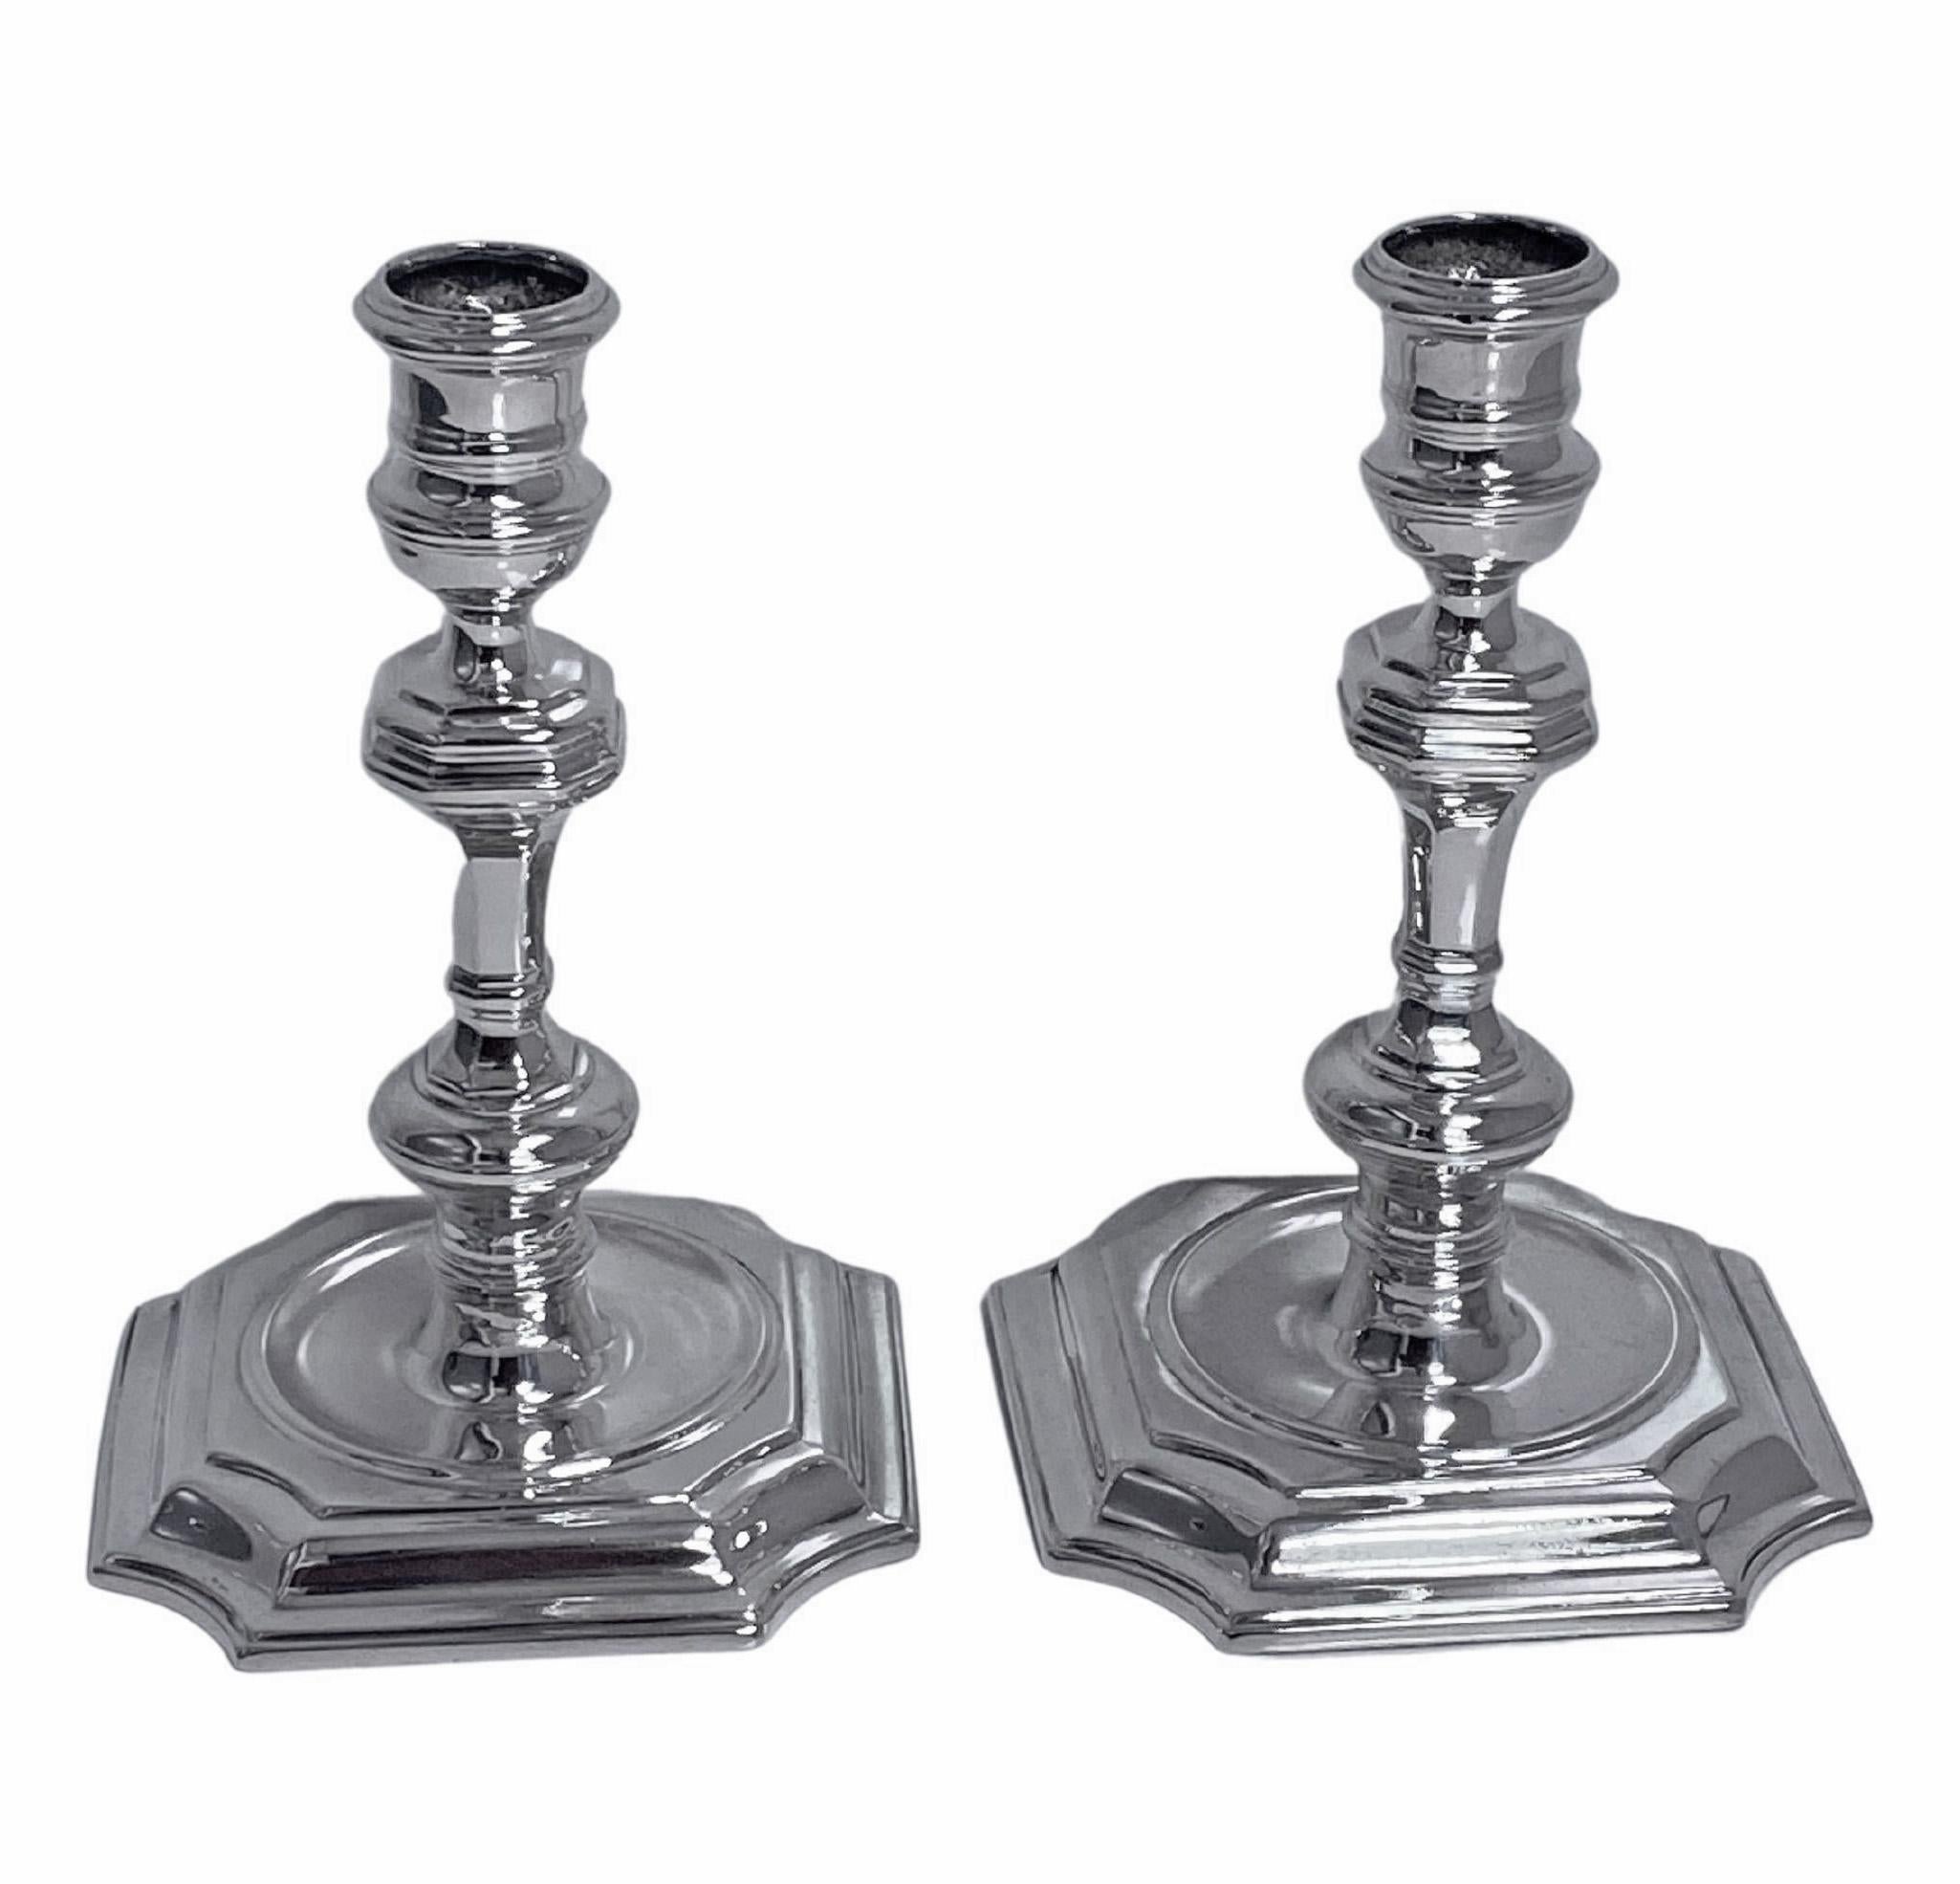 Pair English antique silver candlesticks early 18th century Georgian style London 1913 William Comyns. Each on square base with incuse corners, plain knopped stem. Fully hallmarked on bases. Height: 6.30 inches. Total Item Weight: 23 oz. These are